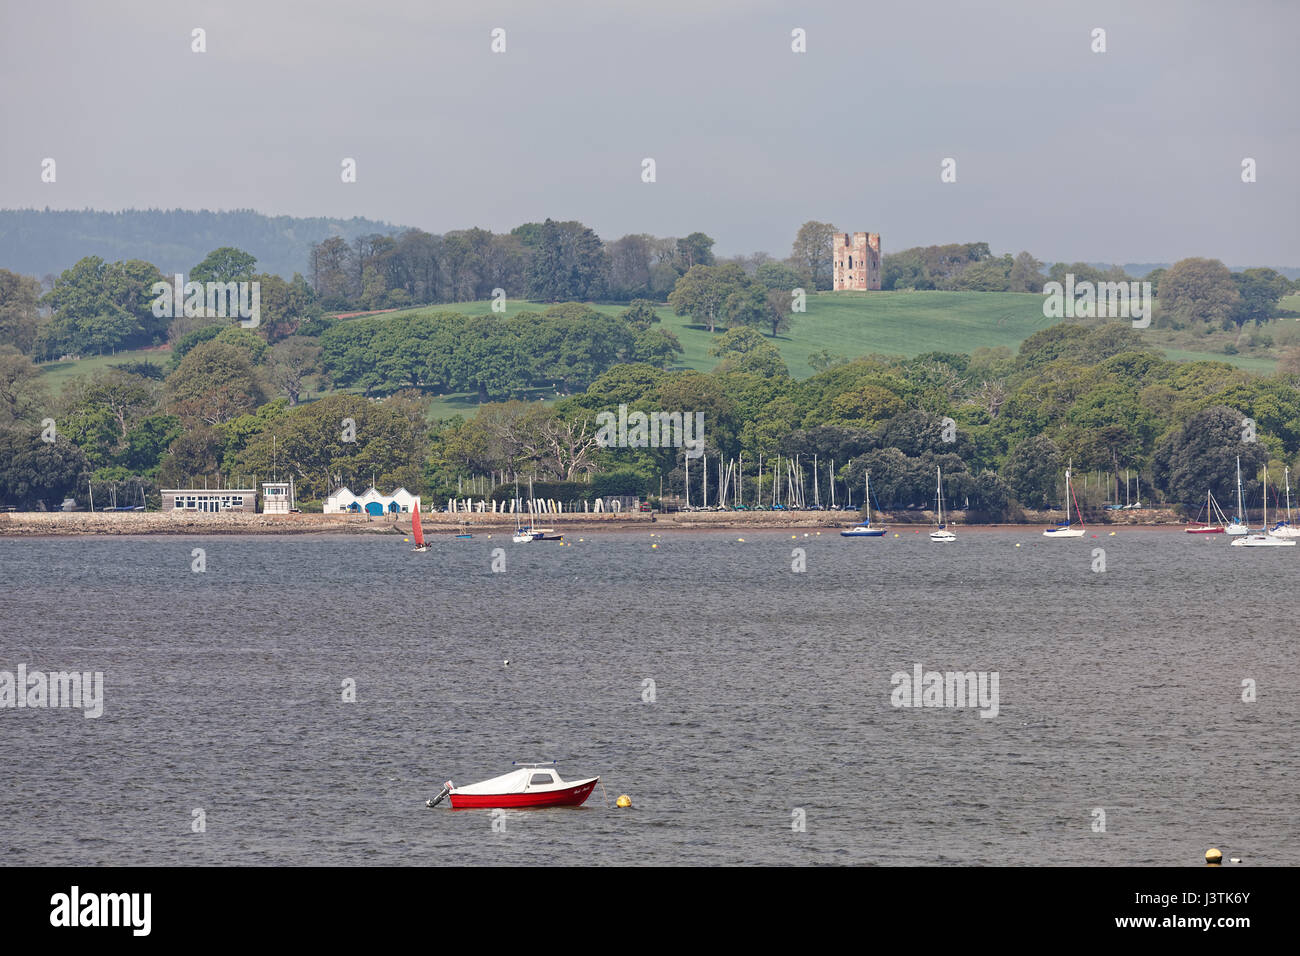 Boats moored in the River Exe estuary with Starcross Yacht Club and Powderham Folly (Belvedere Tower) in the background Stock Photo